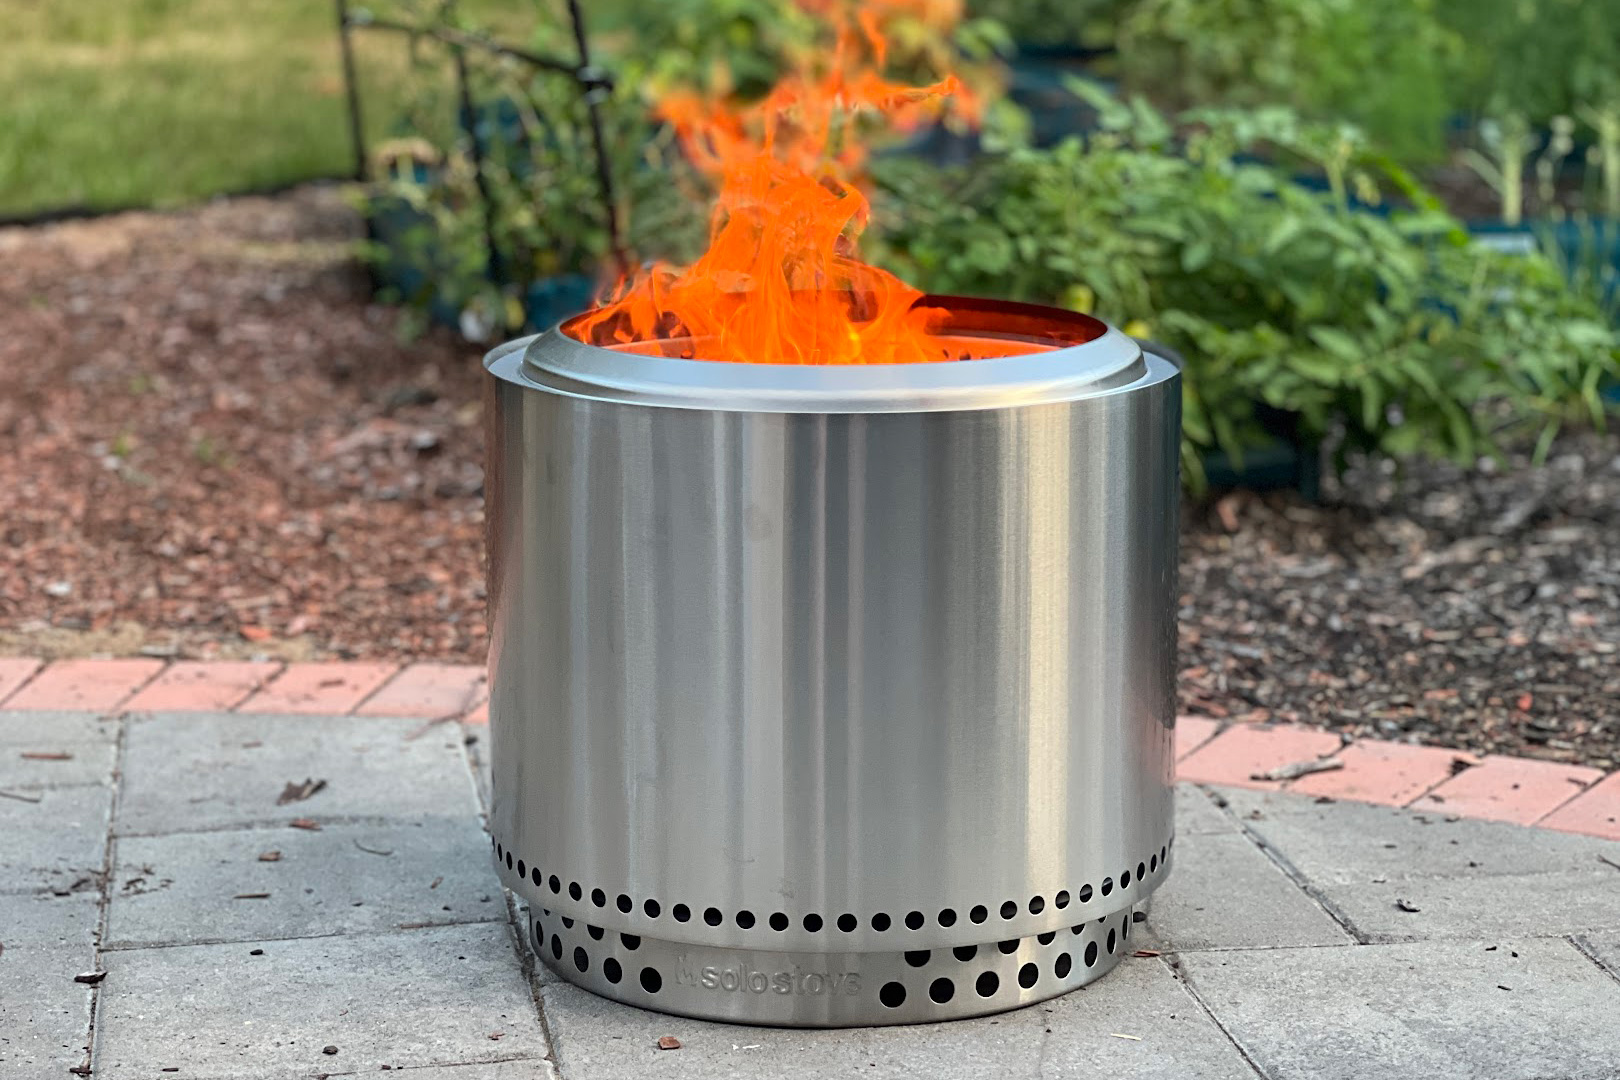 Solo Stove Bonfire 2.0 review – the smokeless firepit tested